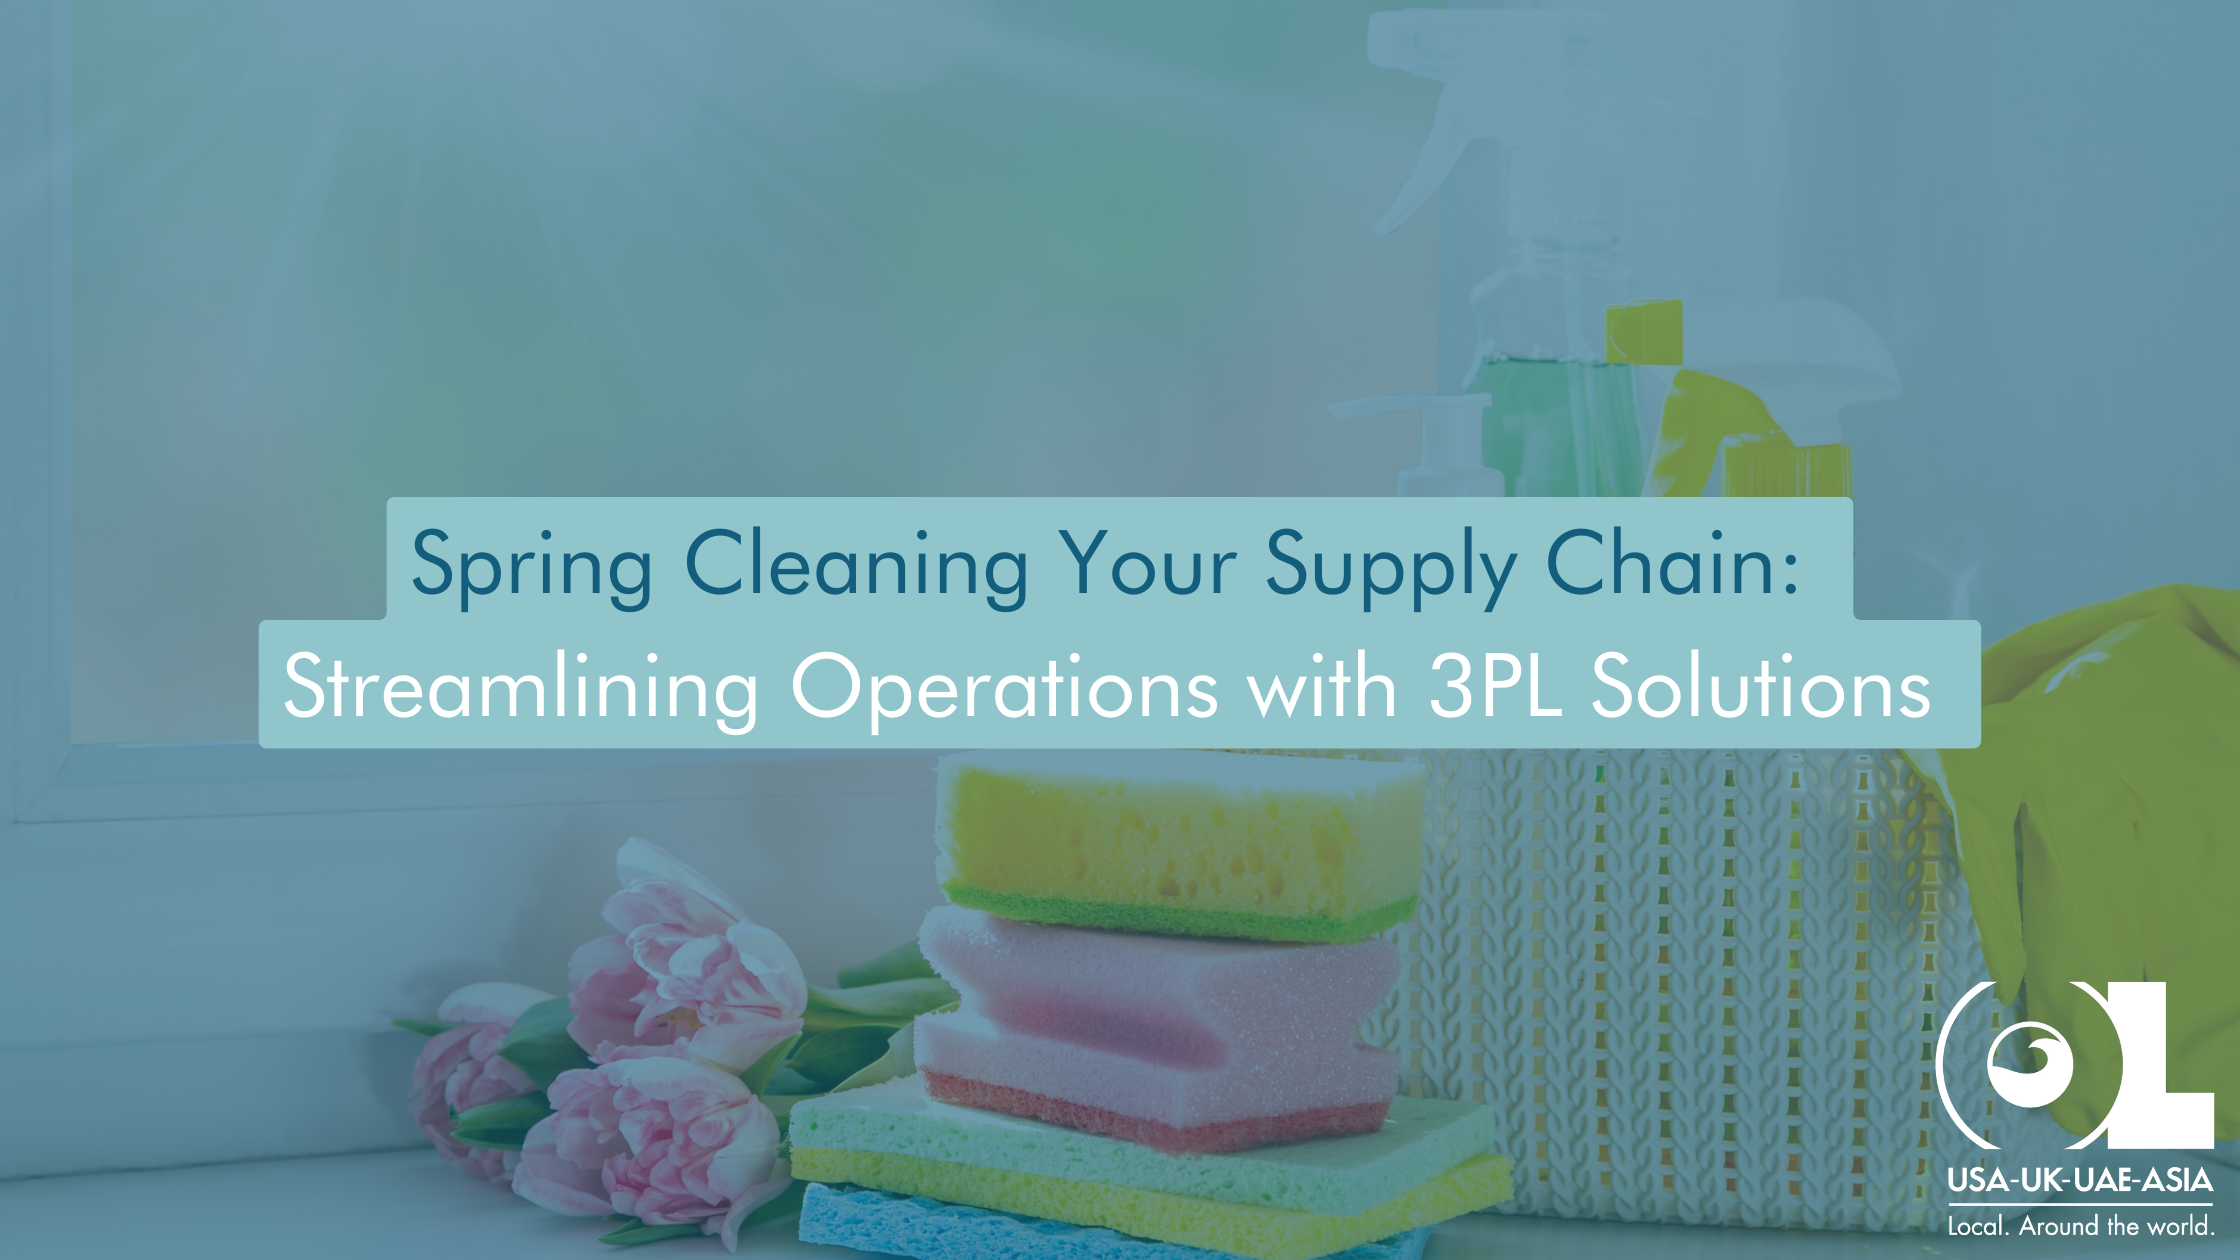 Spring-Cleaning-Your-Supply-Chain-Streamlining-Operations-with-3PL-Solutions-OL-USA